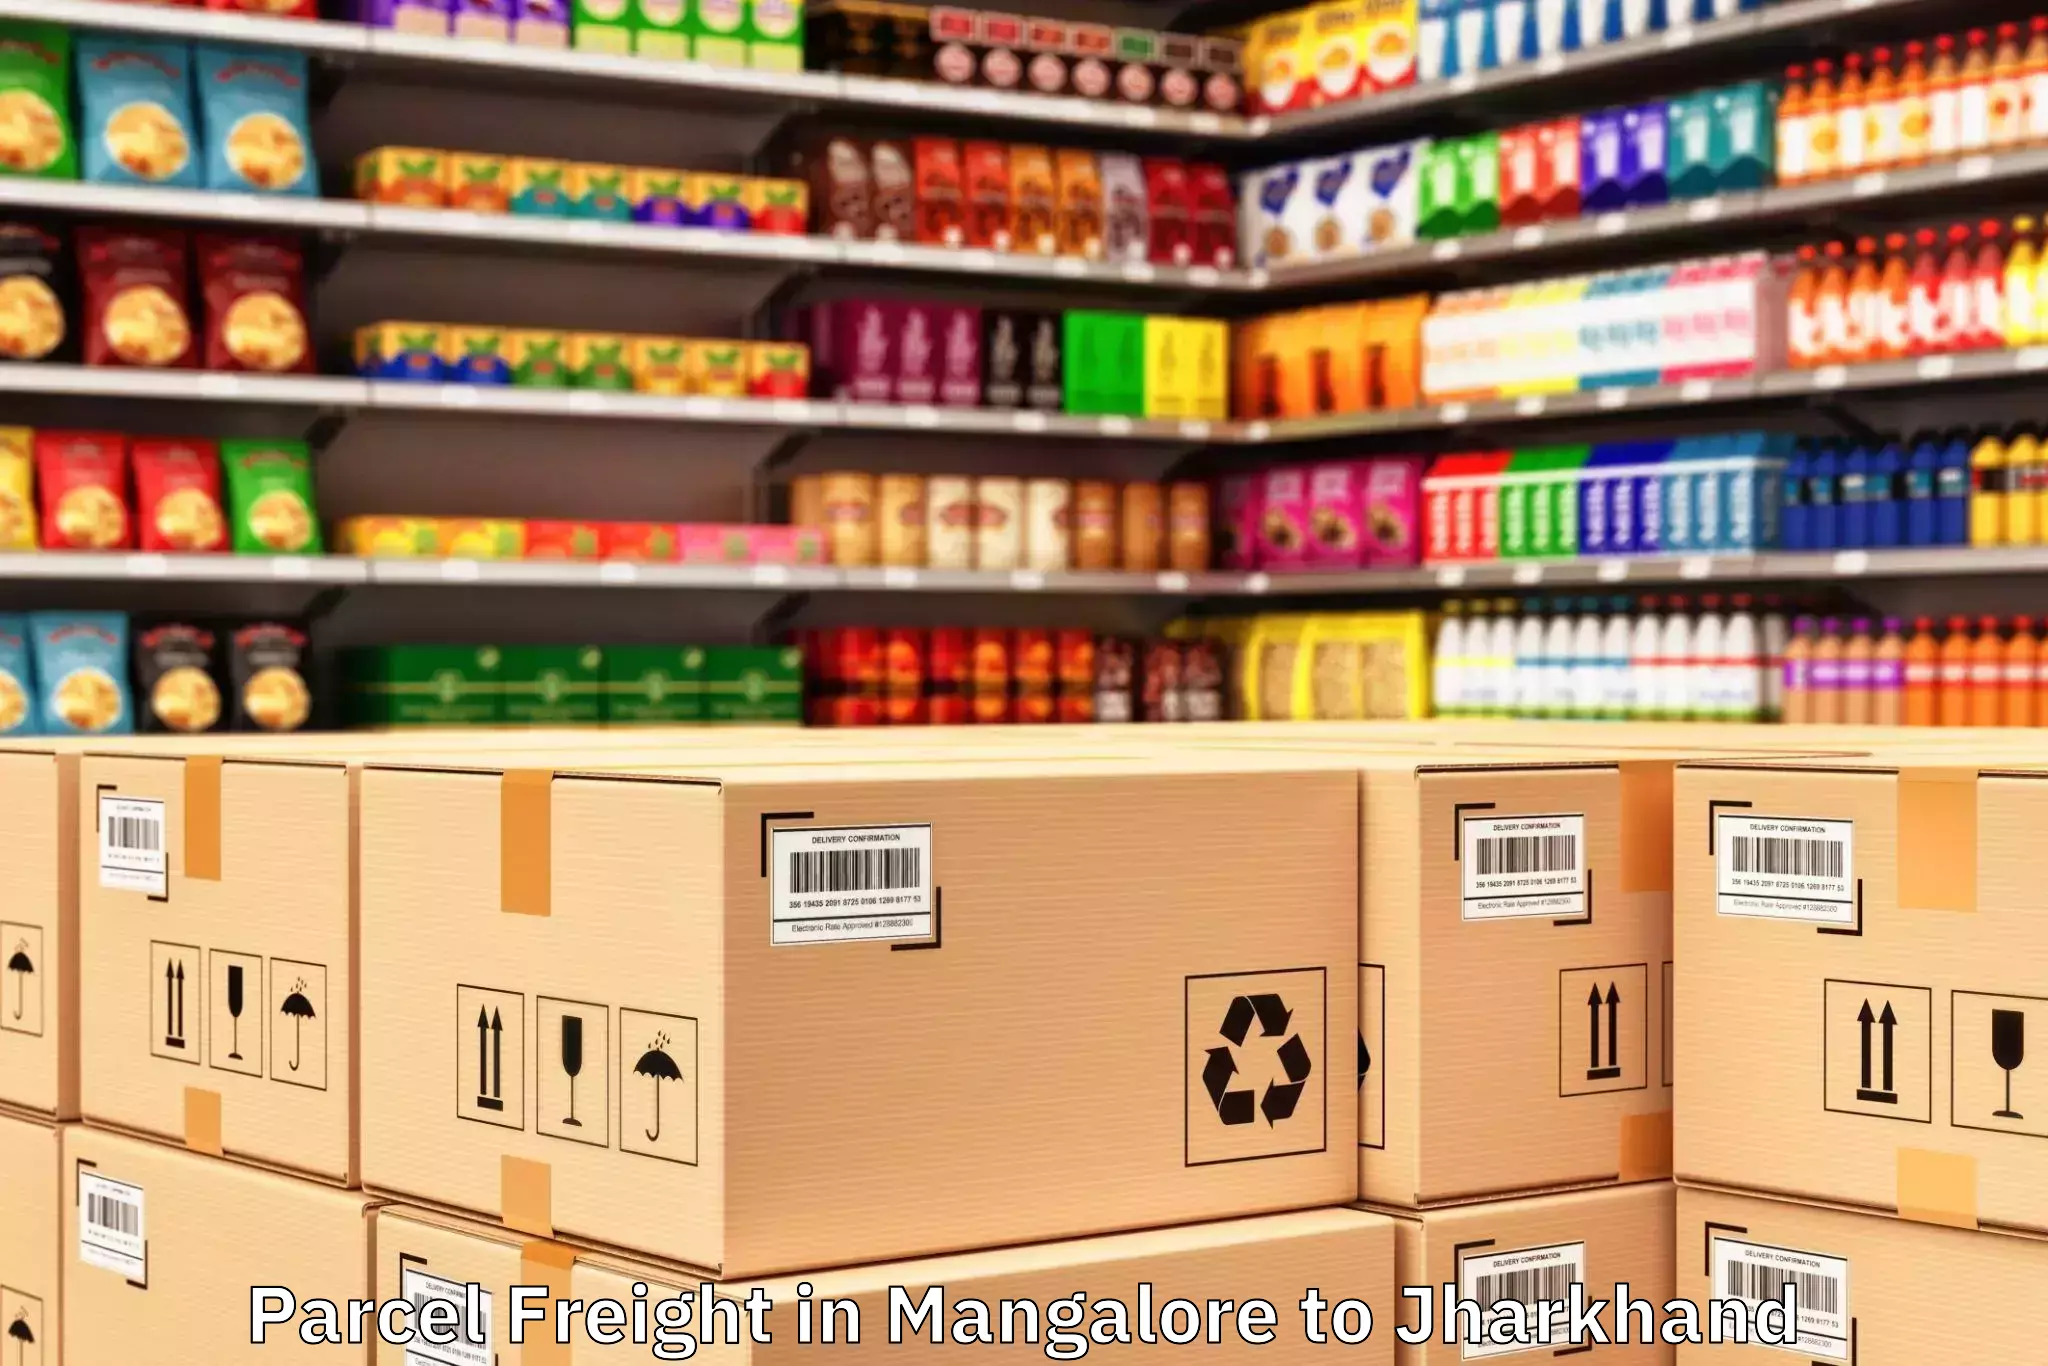 Mangalore to City Centre Mall Dhanbad Parcel Freight